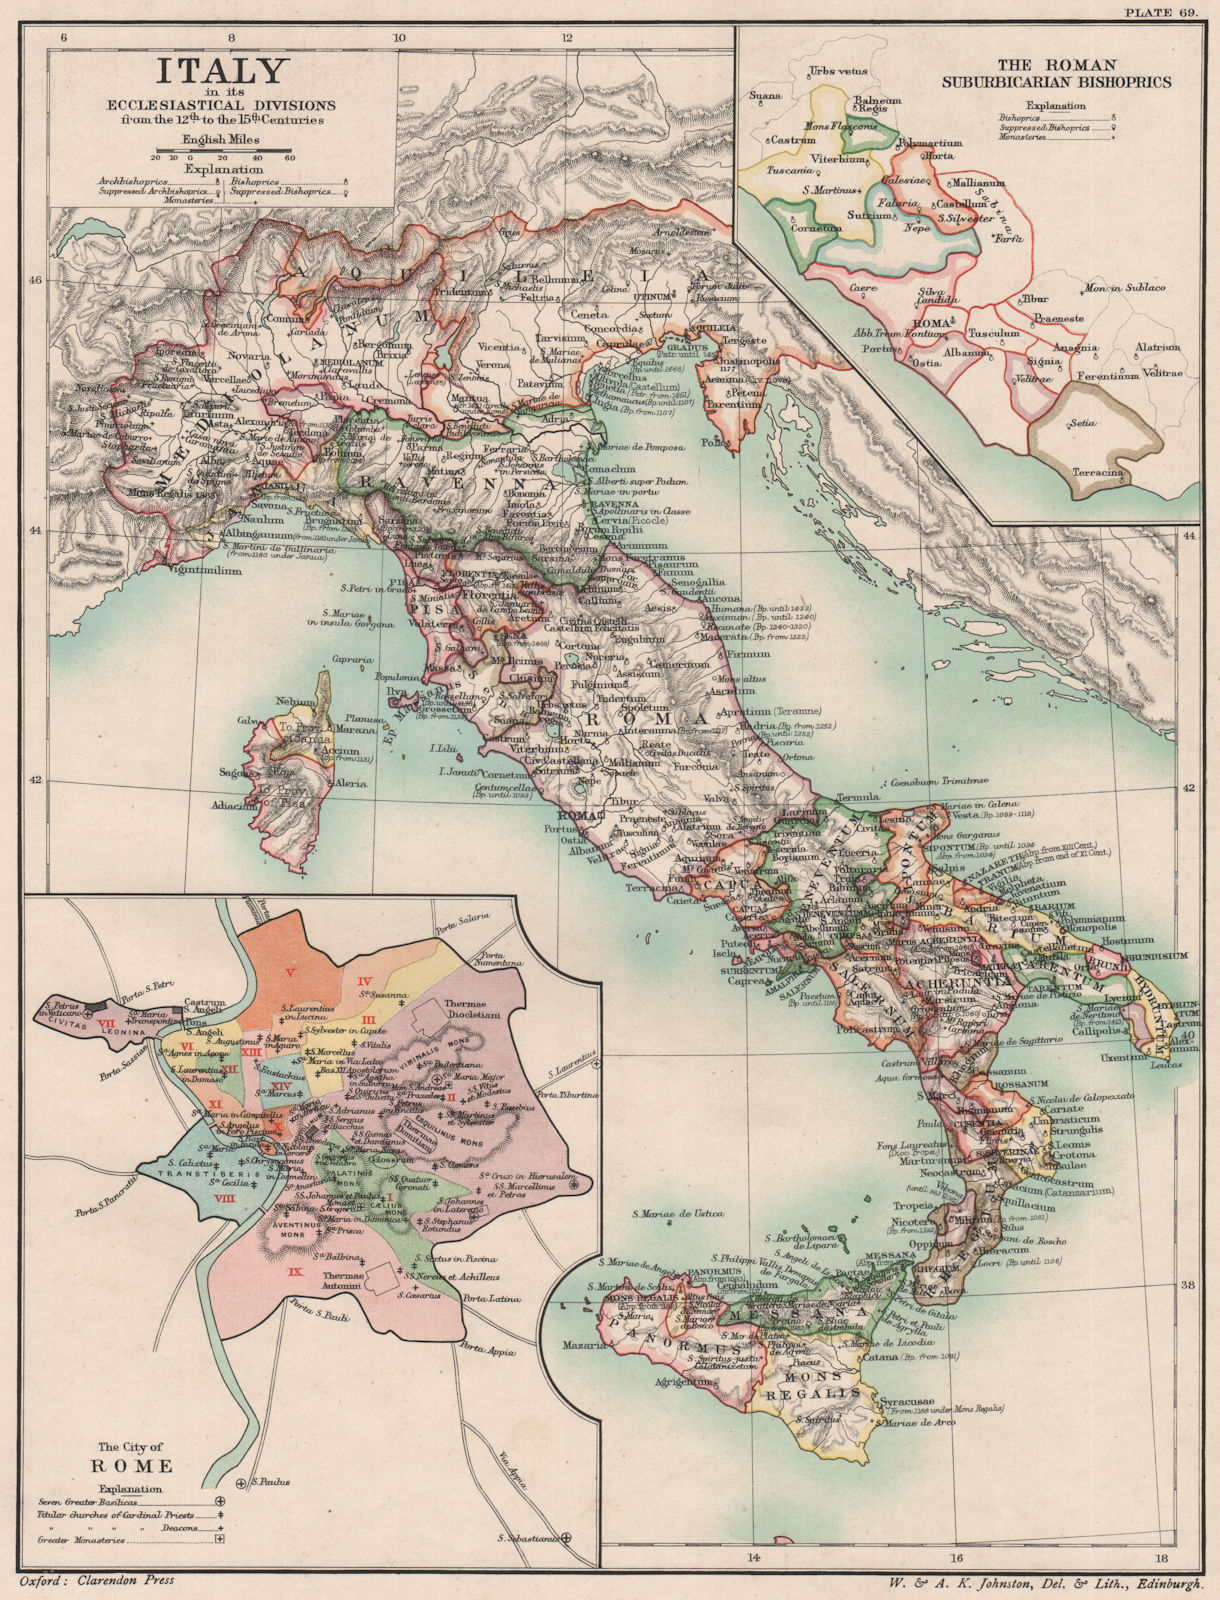 Associate Product ITALY 12TH-15TH CENTURIES. Ecclesiastical divisions. Roman Bishoprics 1902 map